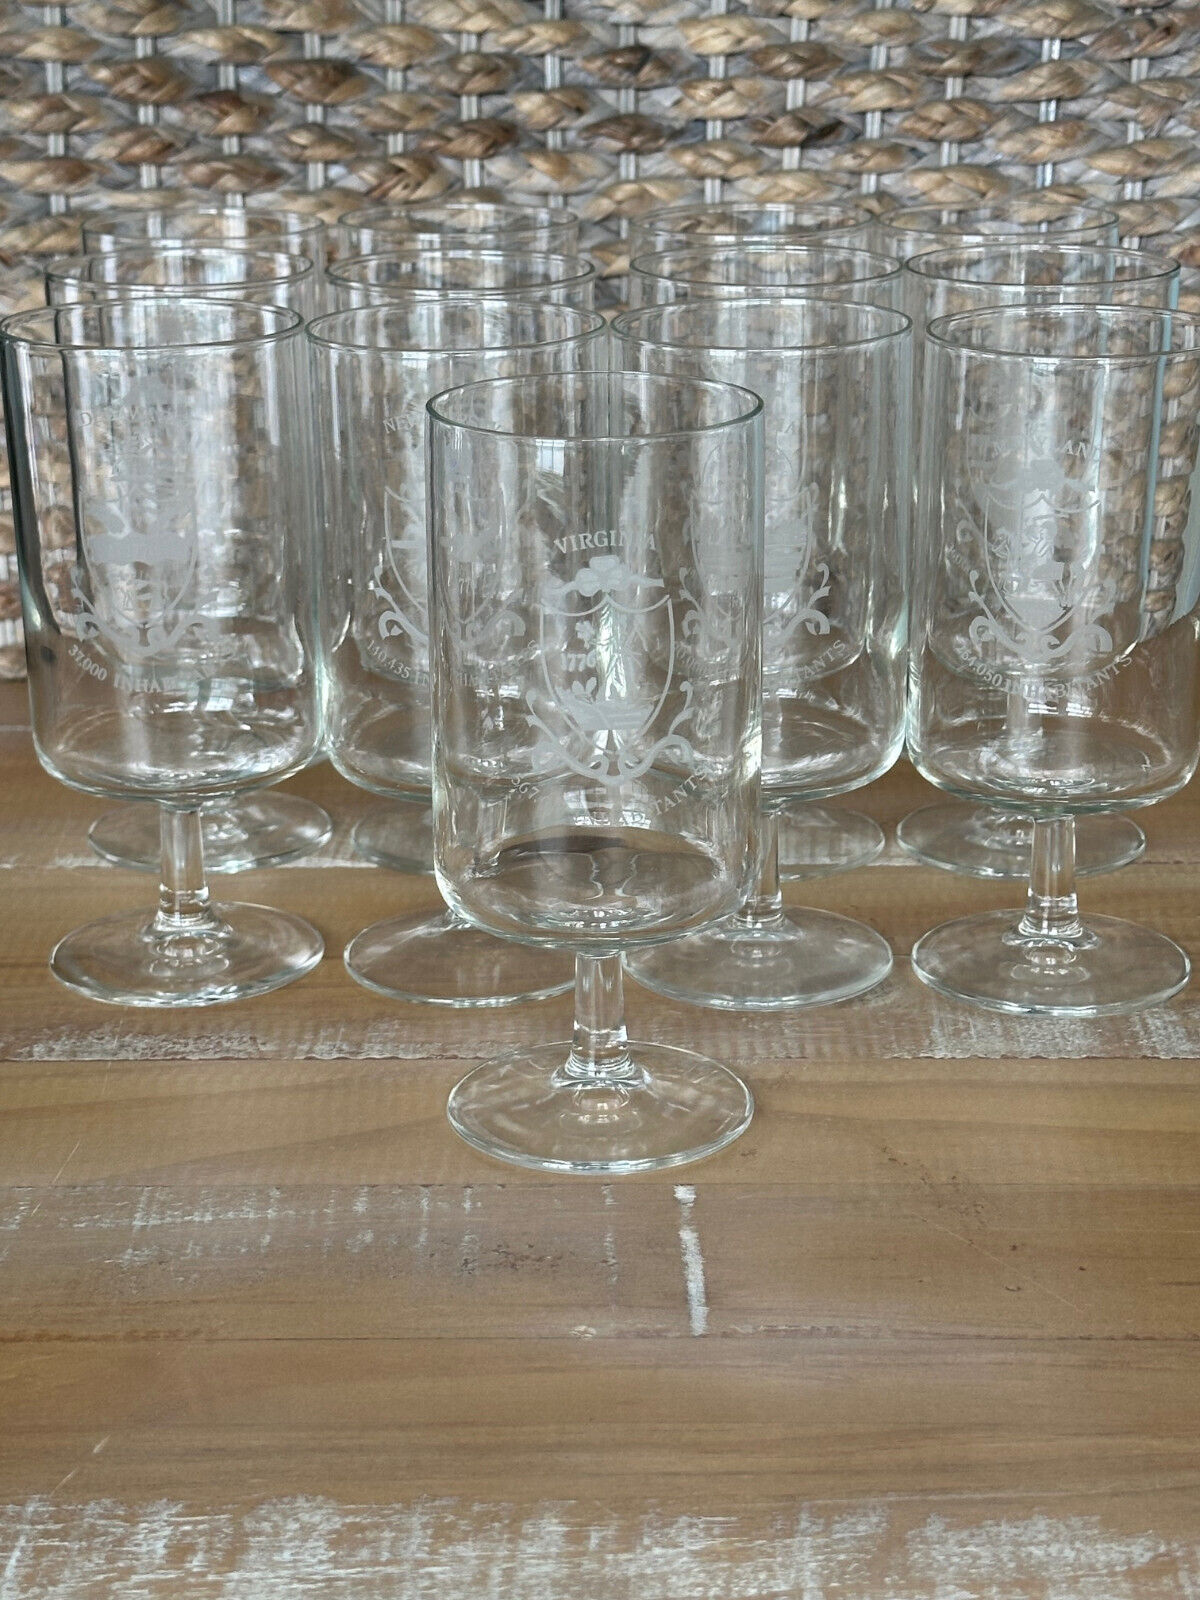 Original 13 Colonies With Inhabitants Count And State Seal Etched Wine Glasses